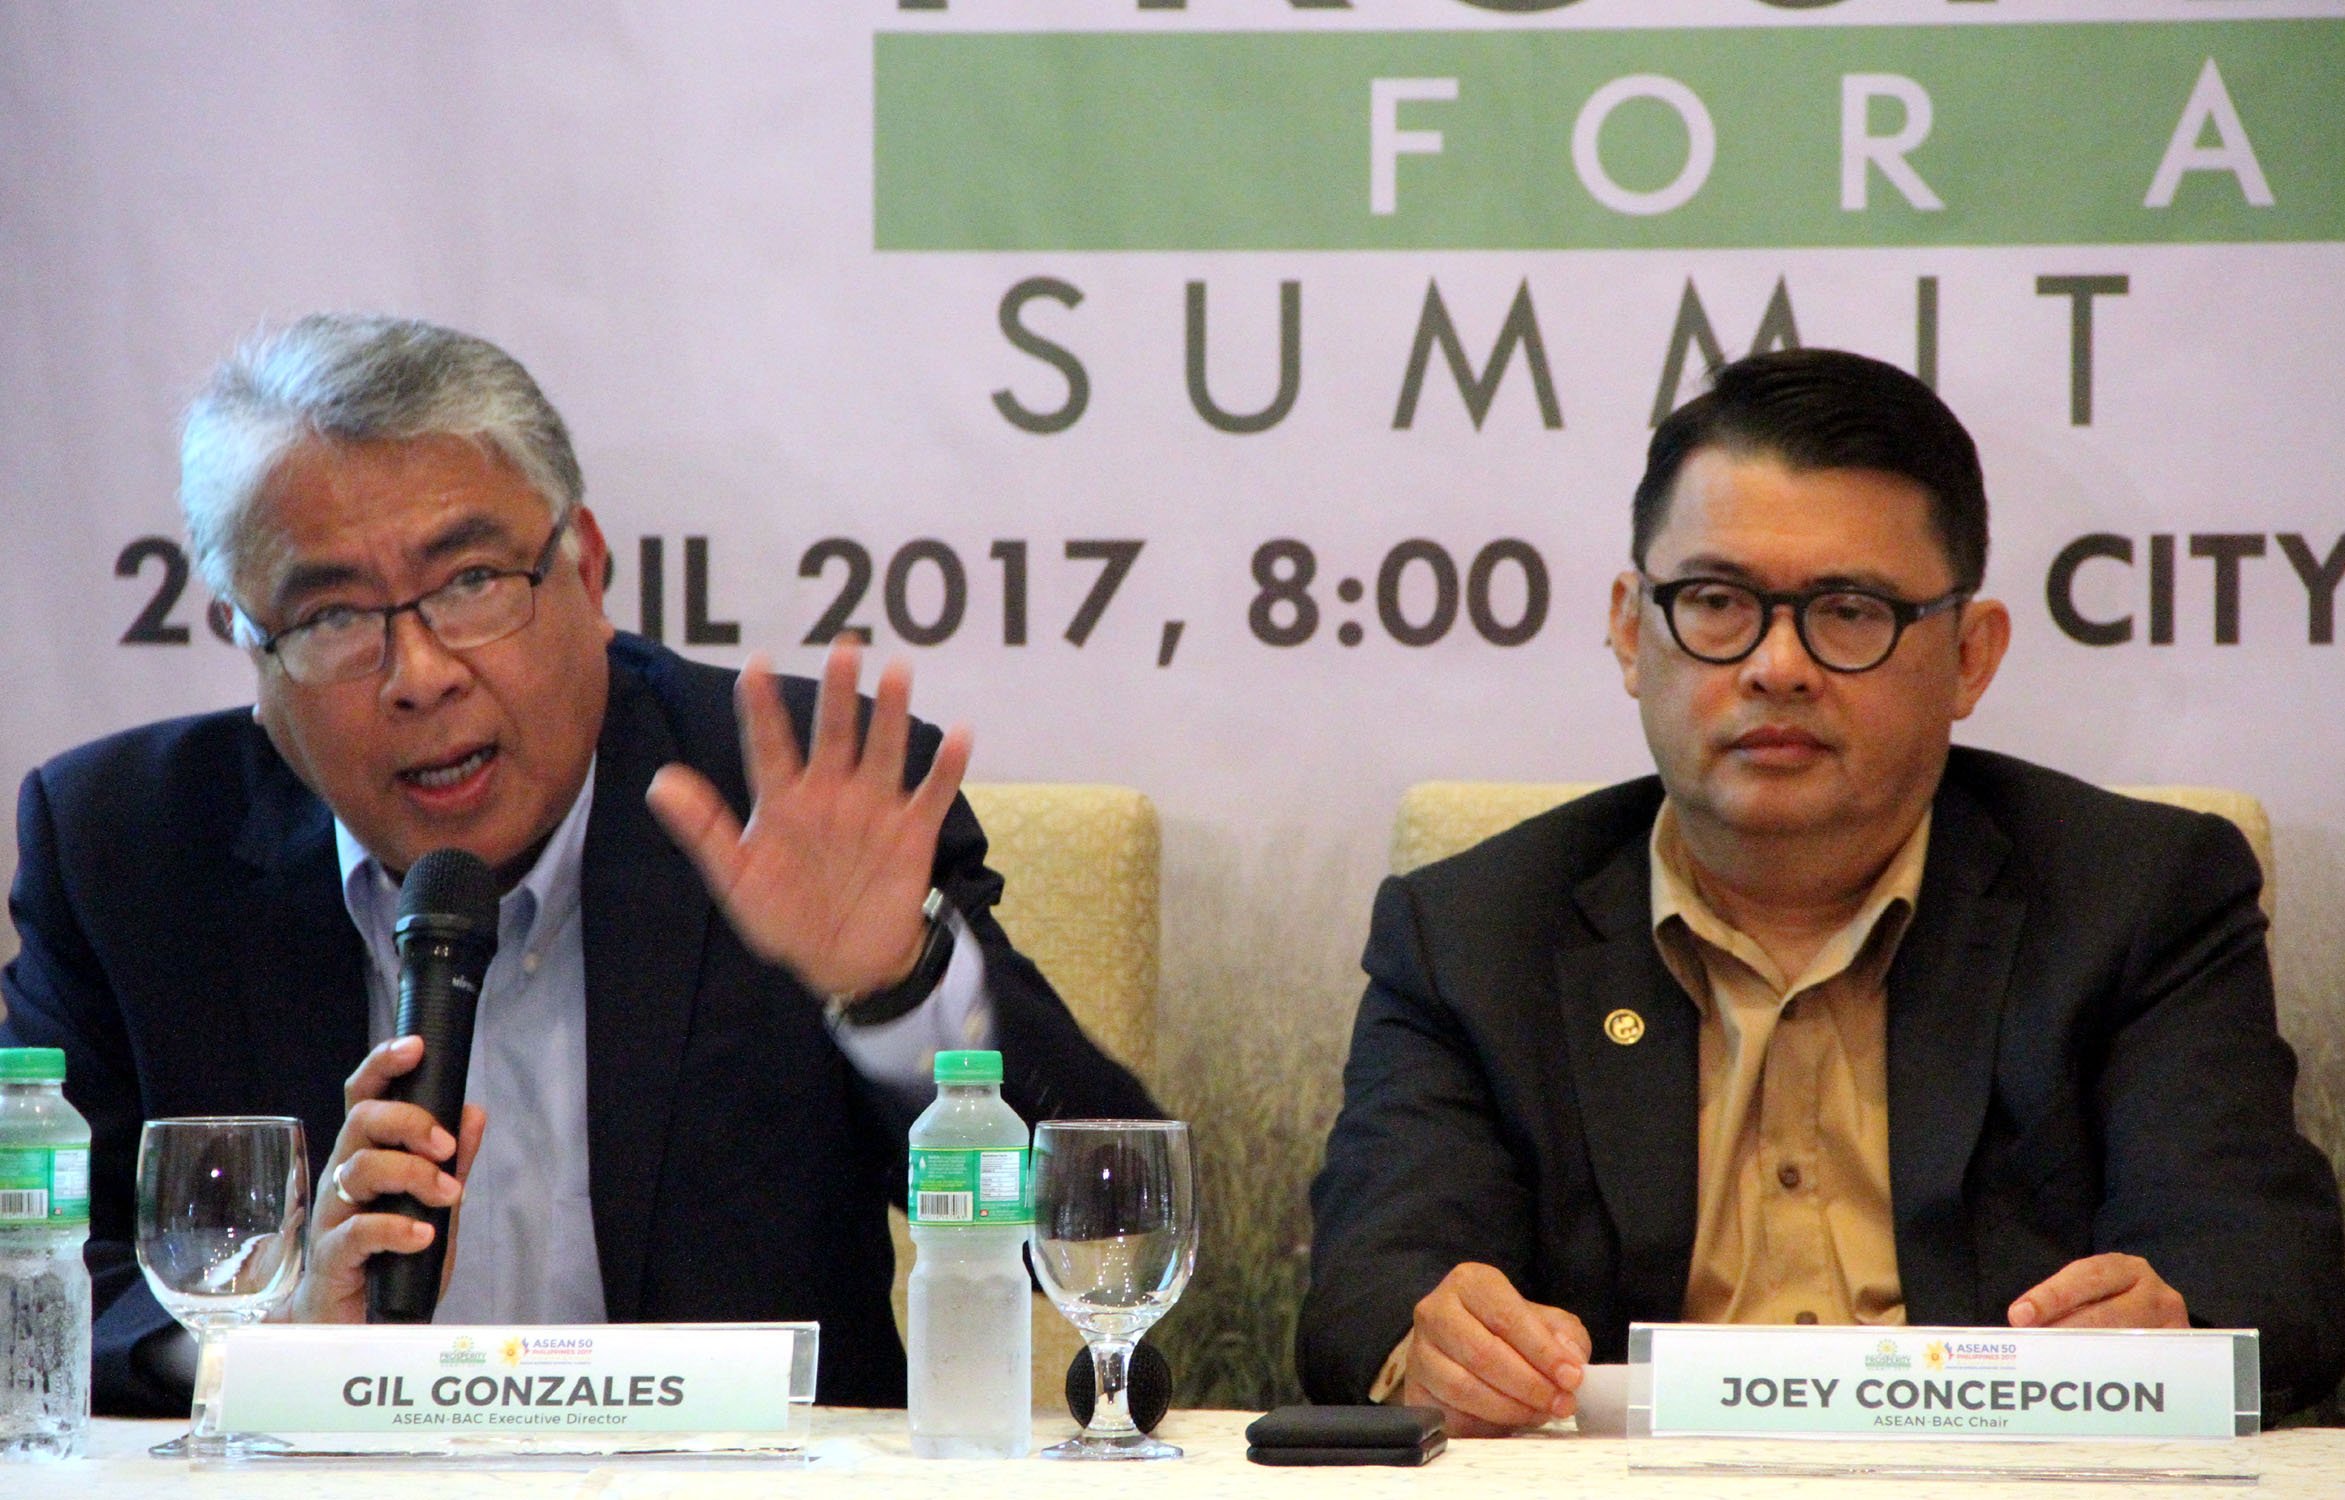 Gil Gonzales, Executive Director ASEAN-BAC presents Overview of the Prosperity for All Summit